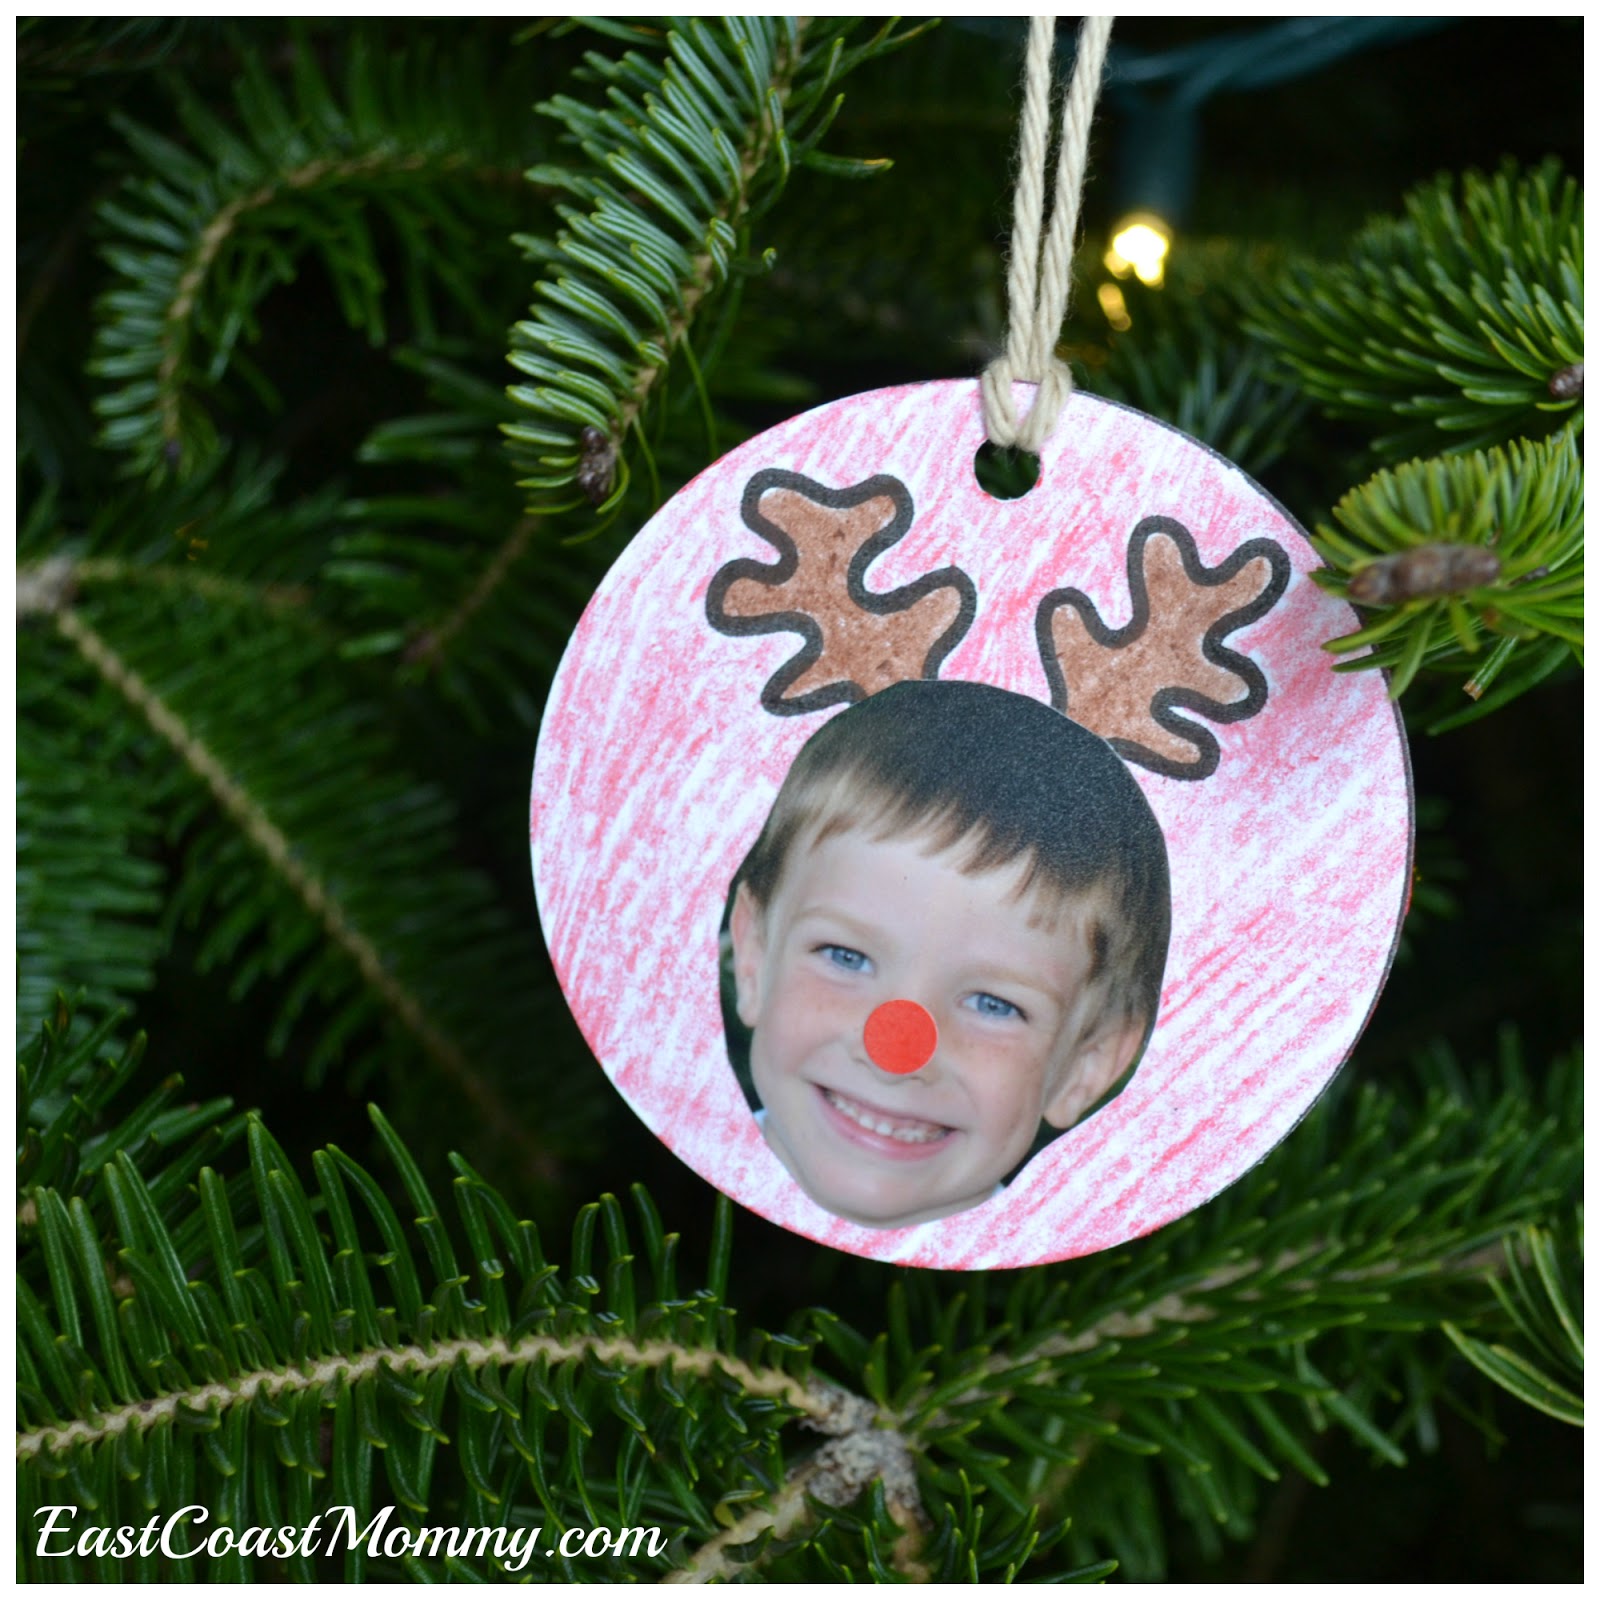 East Coast Mommy: Easy REINDEER Crafts (that kids will love)